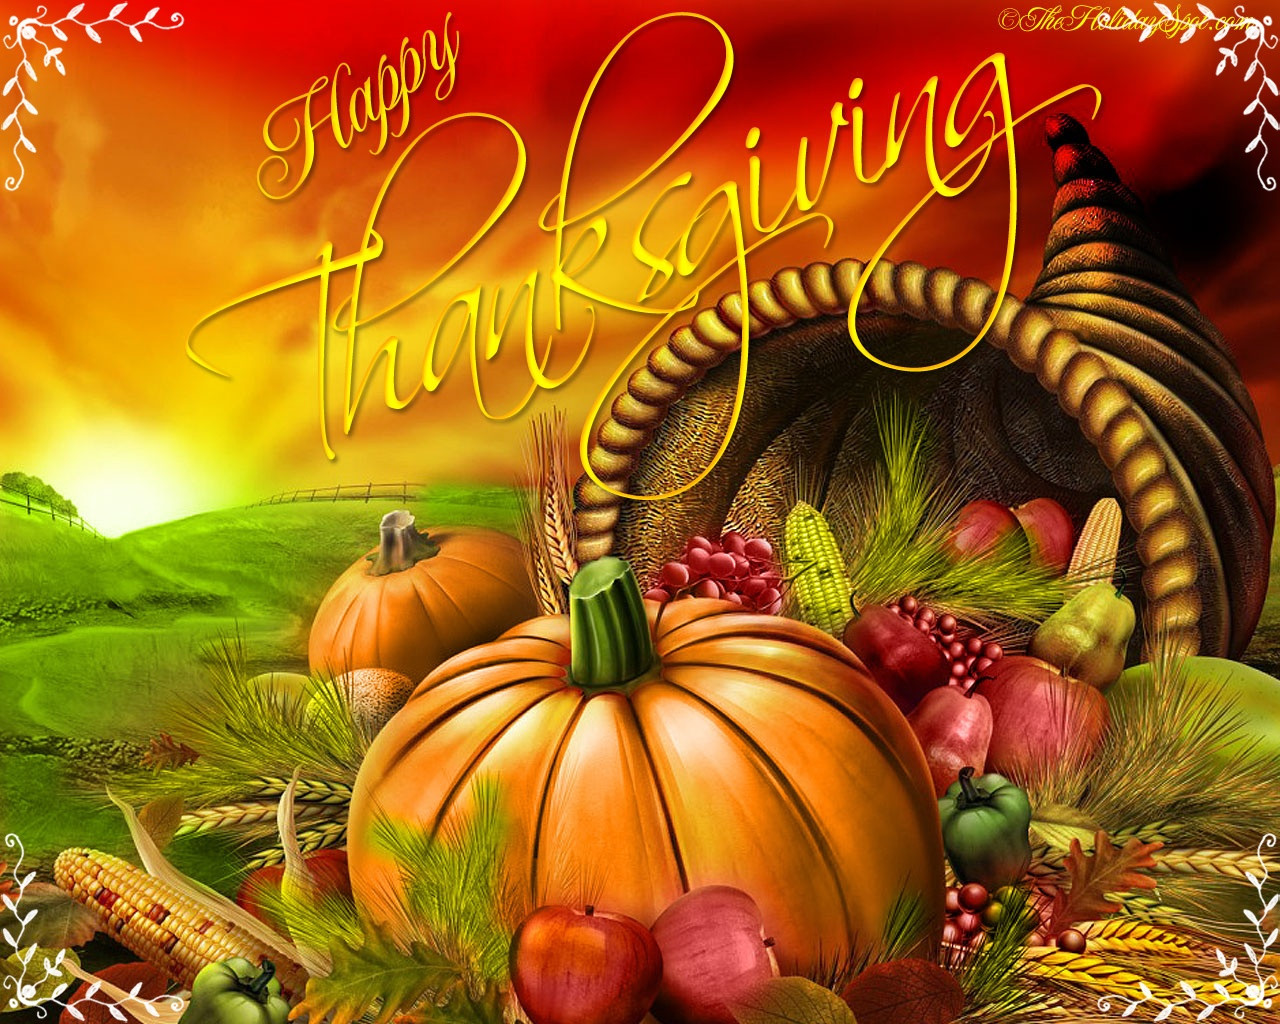 Happy Thanksgiving Day Quotes
 11 Thanksgiving and Gratitude Quotes For Reflection